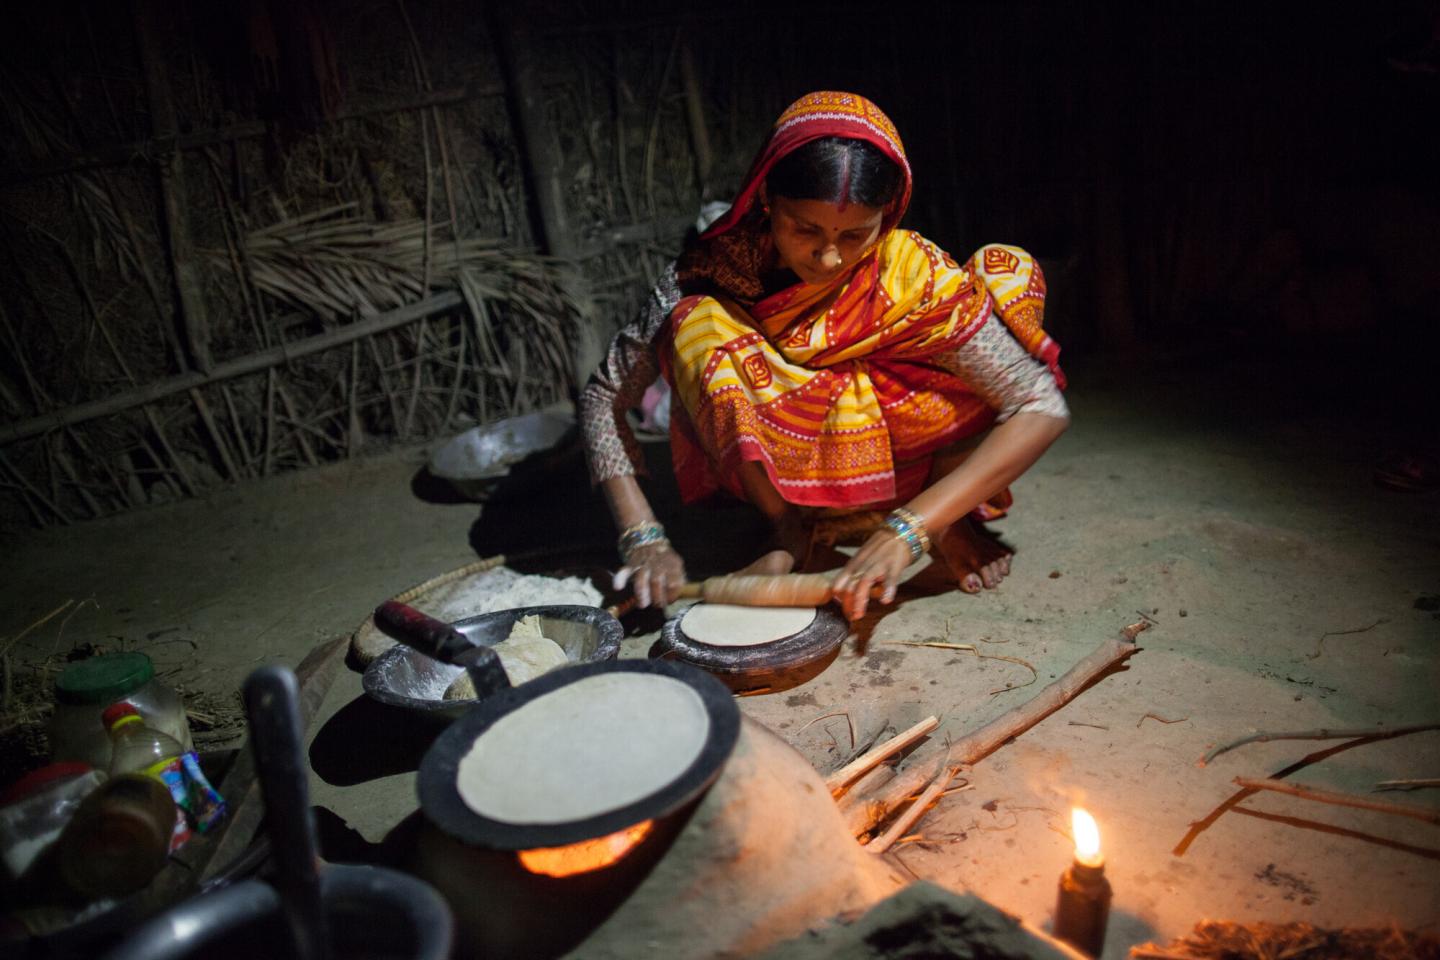 A Nepali woman squats on the ground and rolls out flat bread by her outdoor tandoori oven.She is working by candlelight